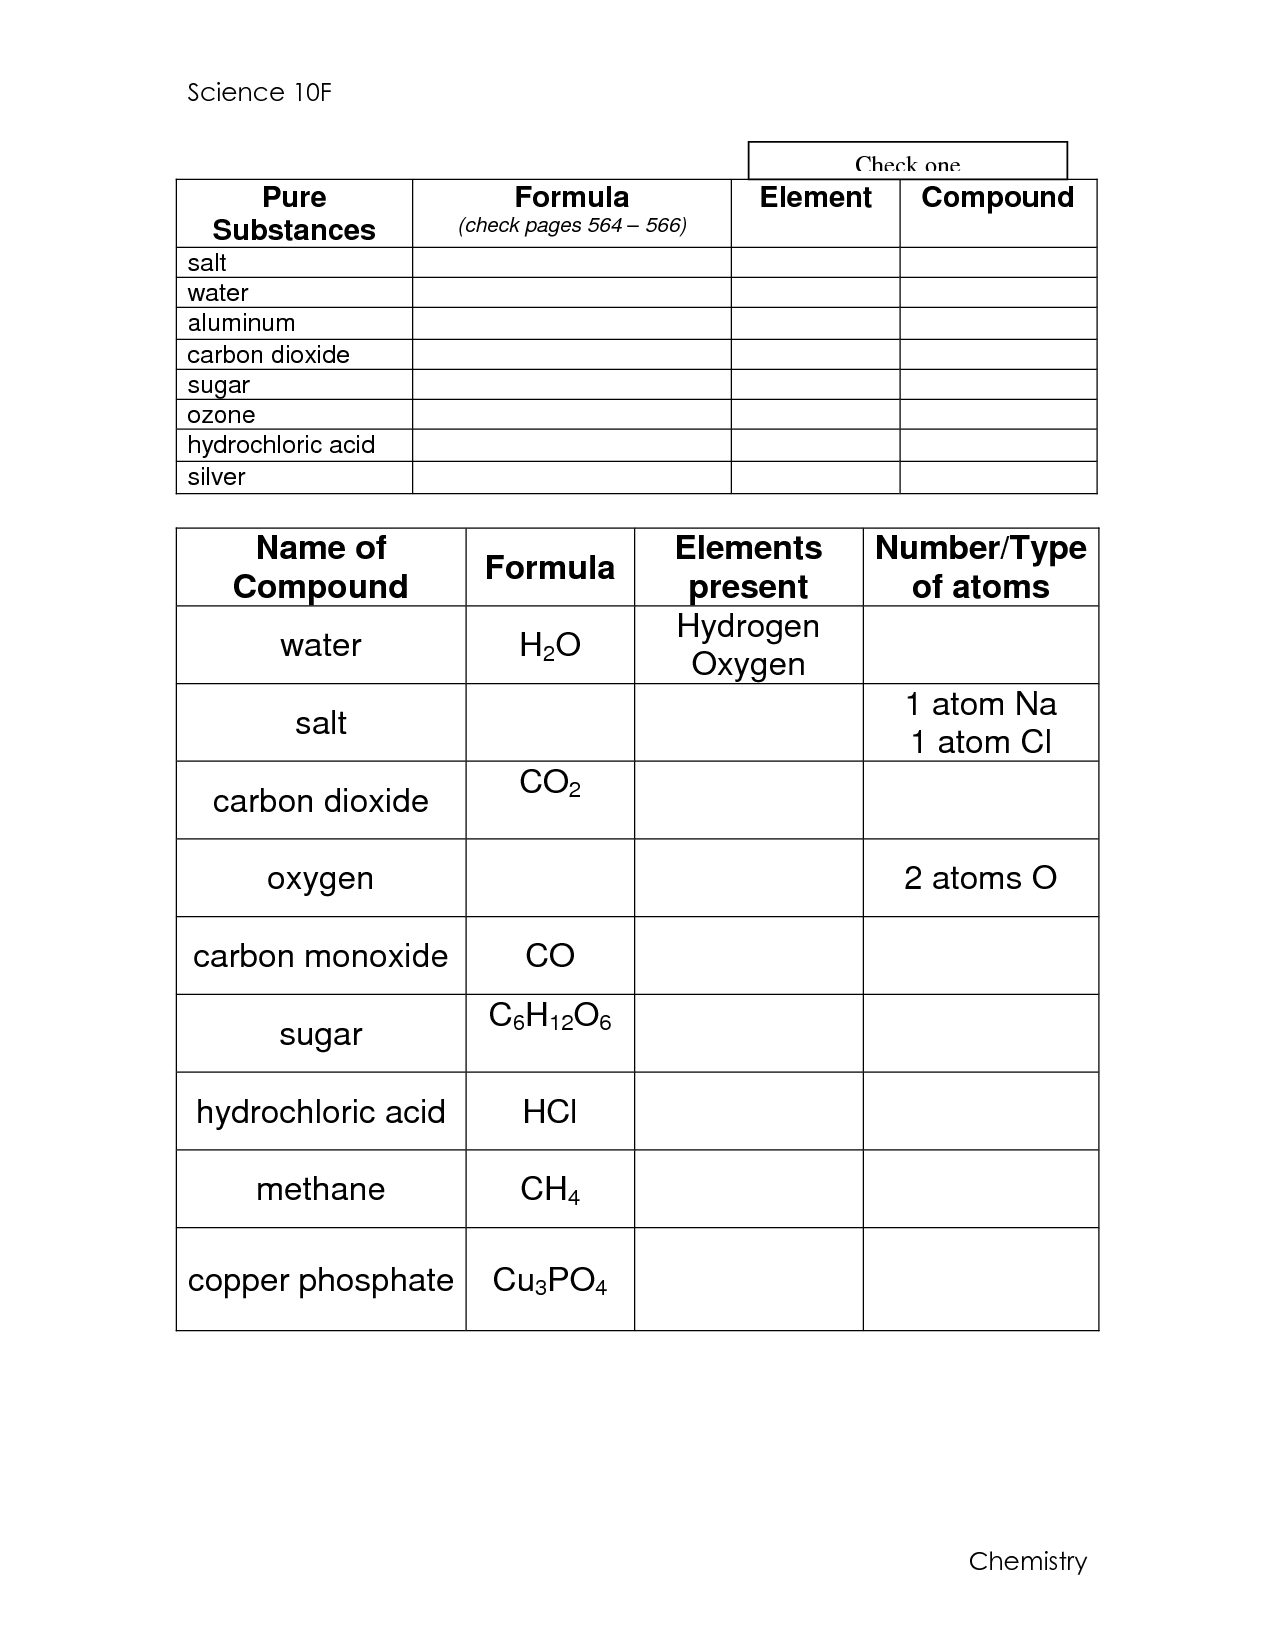 15 Best Images of Carbon Compounds Worksheet - Carbohydrates Review